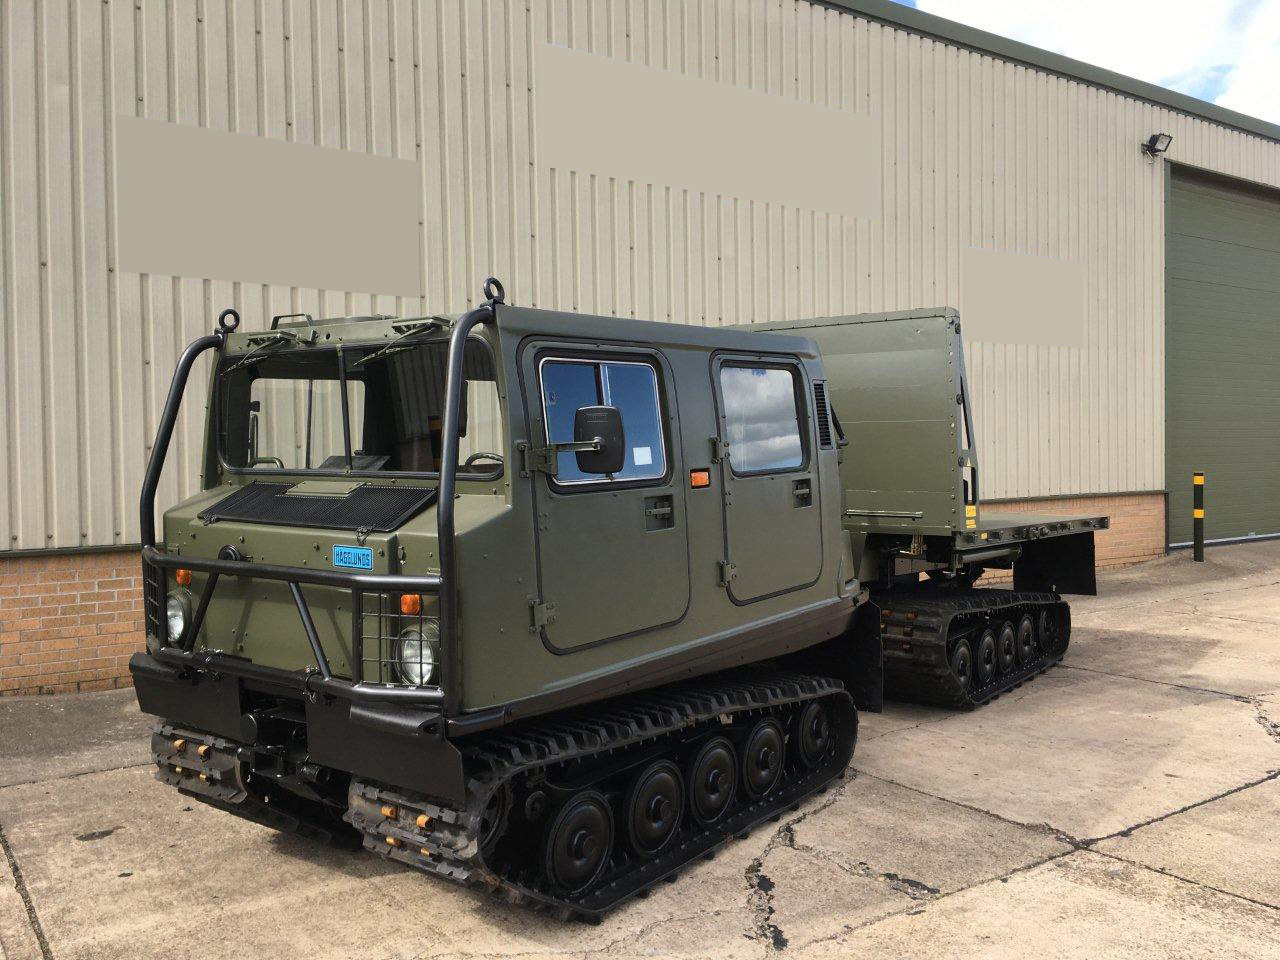 Hagglunds Bv206 Load Carrier with Crane - Govsales of mod surplus ex army trucks, ex army land rovers and other military vehicles for sale